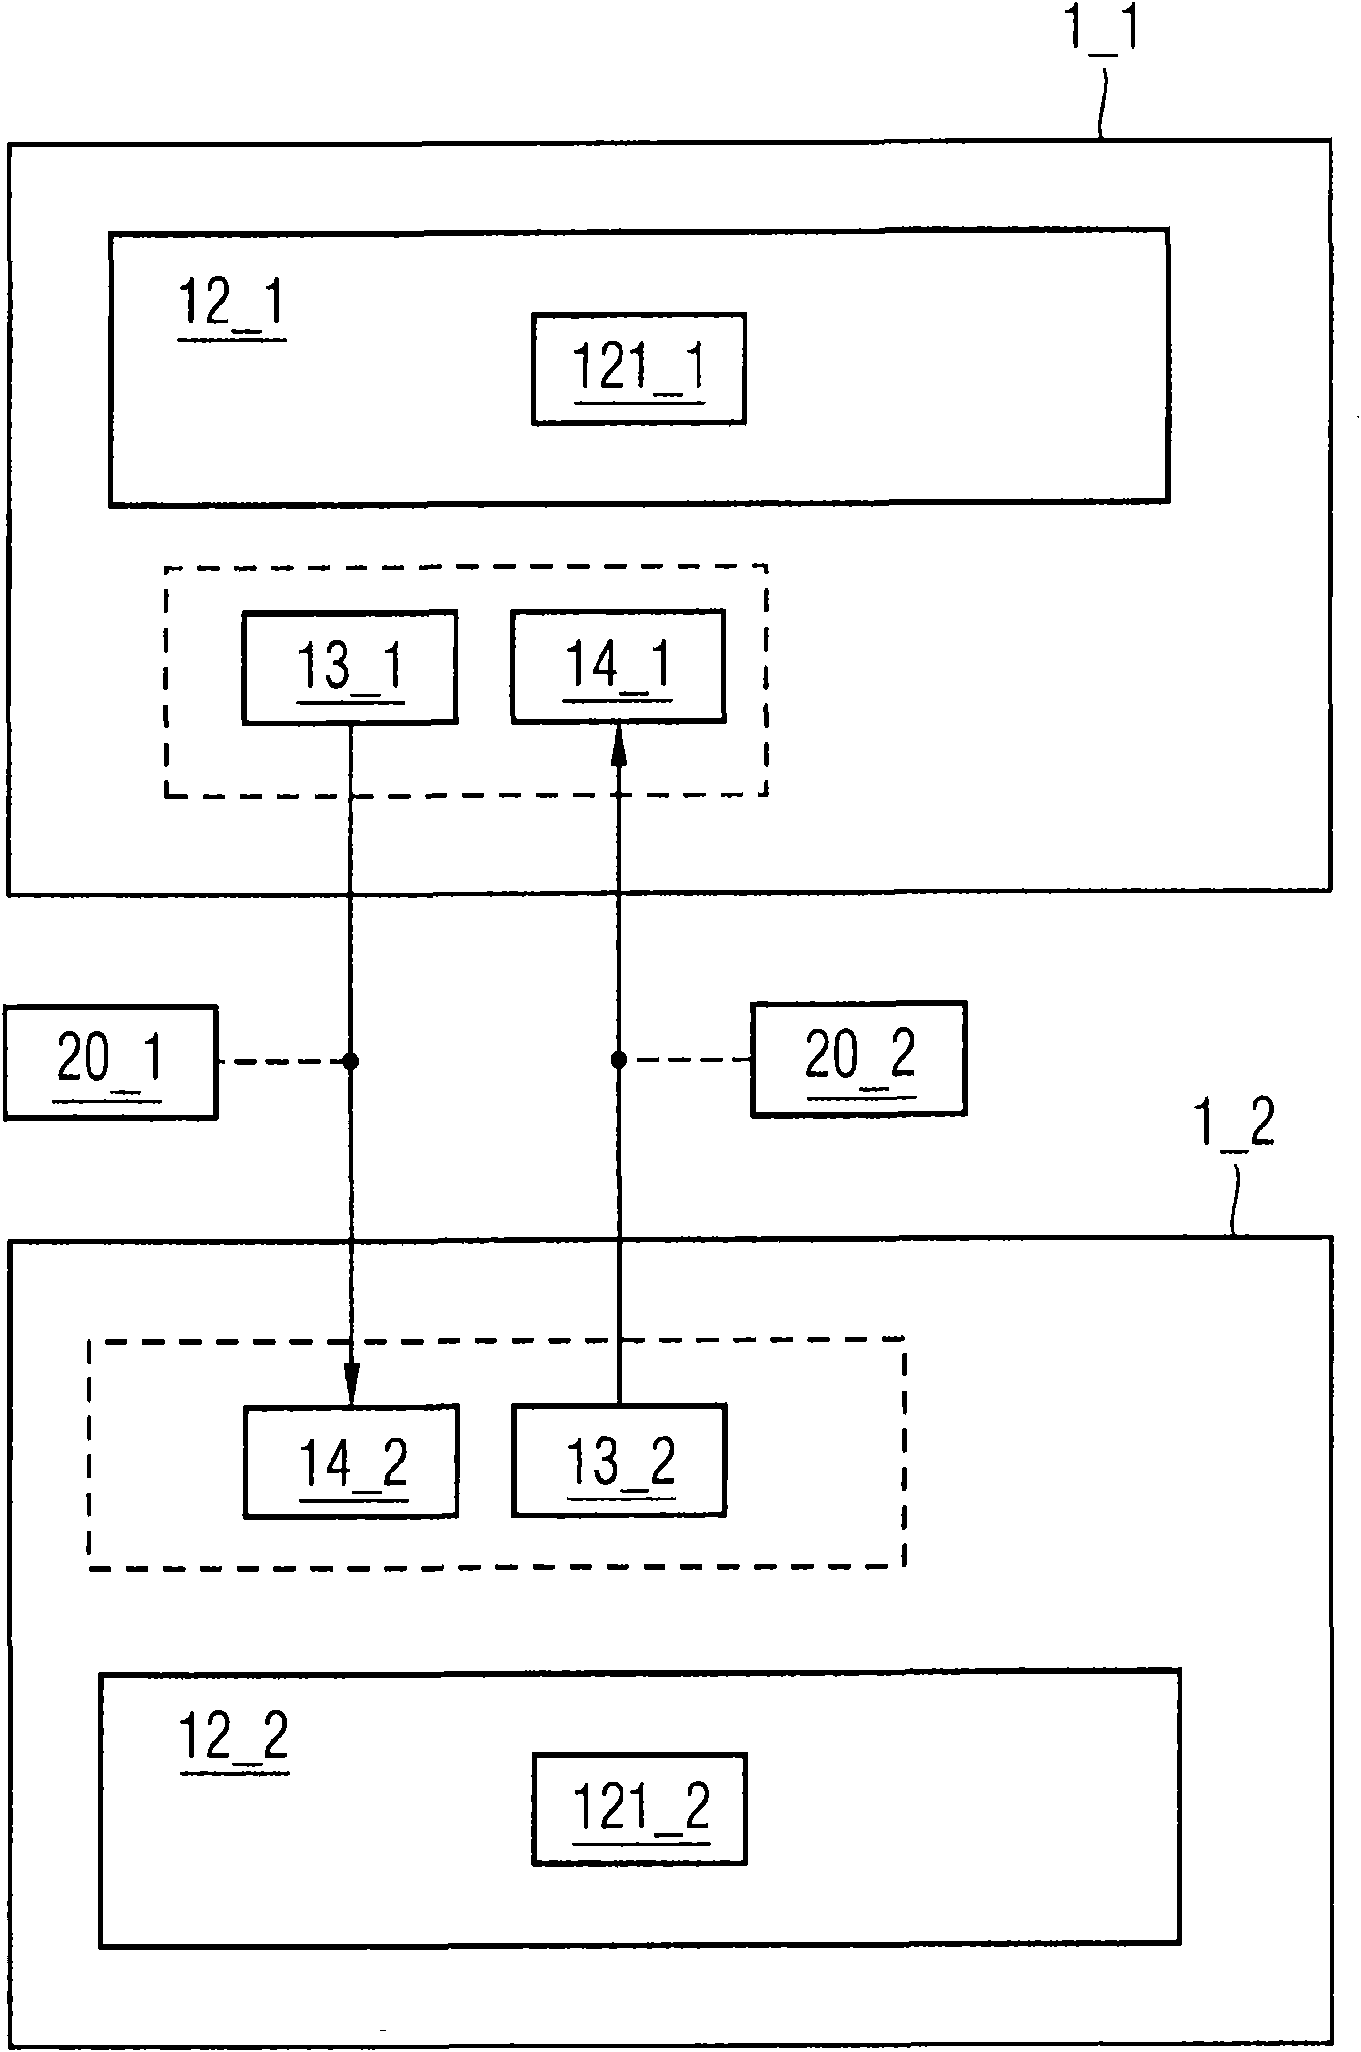 Processing module, device, and method for processing of xml data